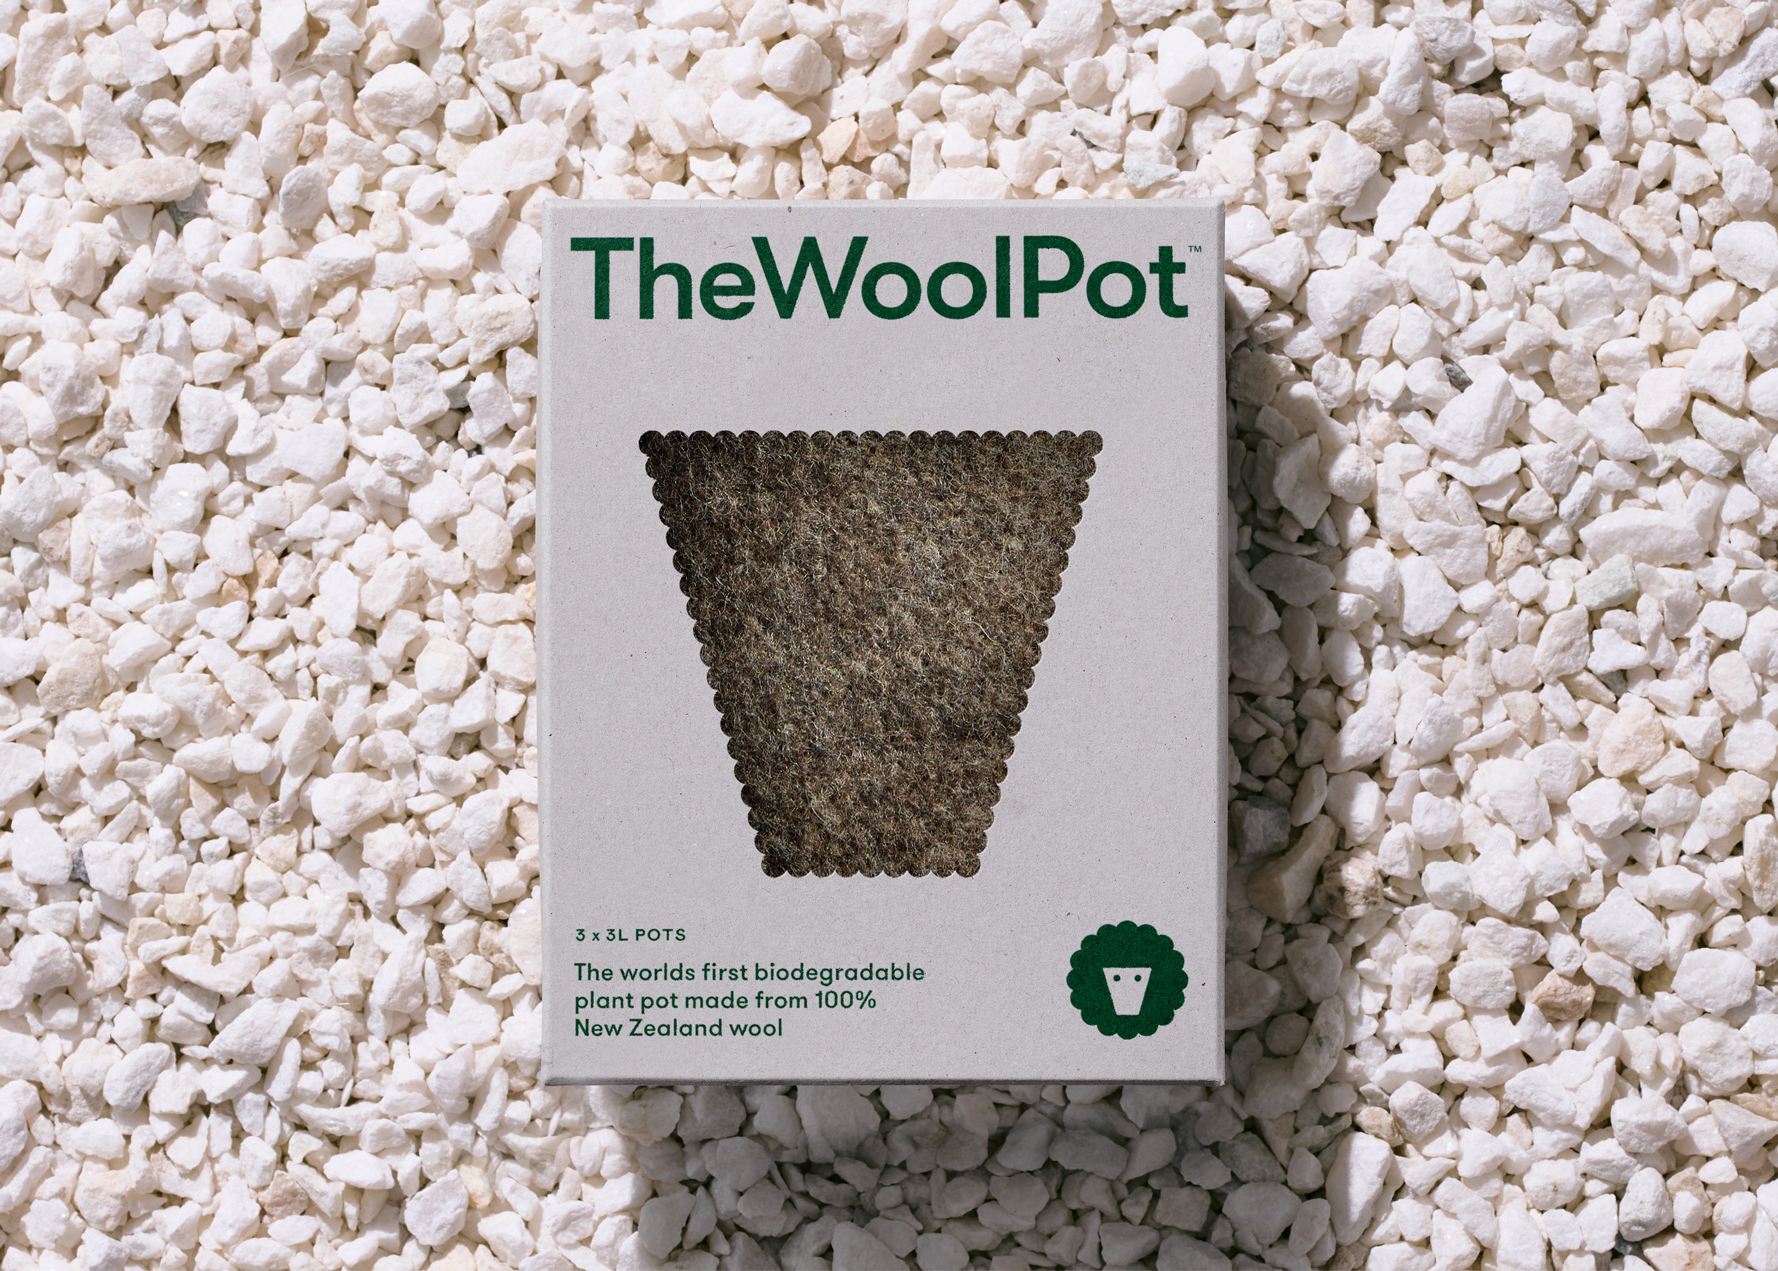 The Wool Pot packaging